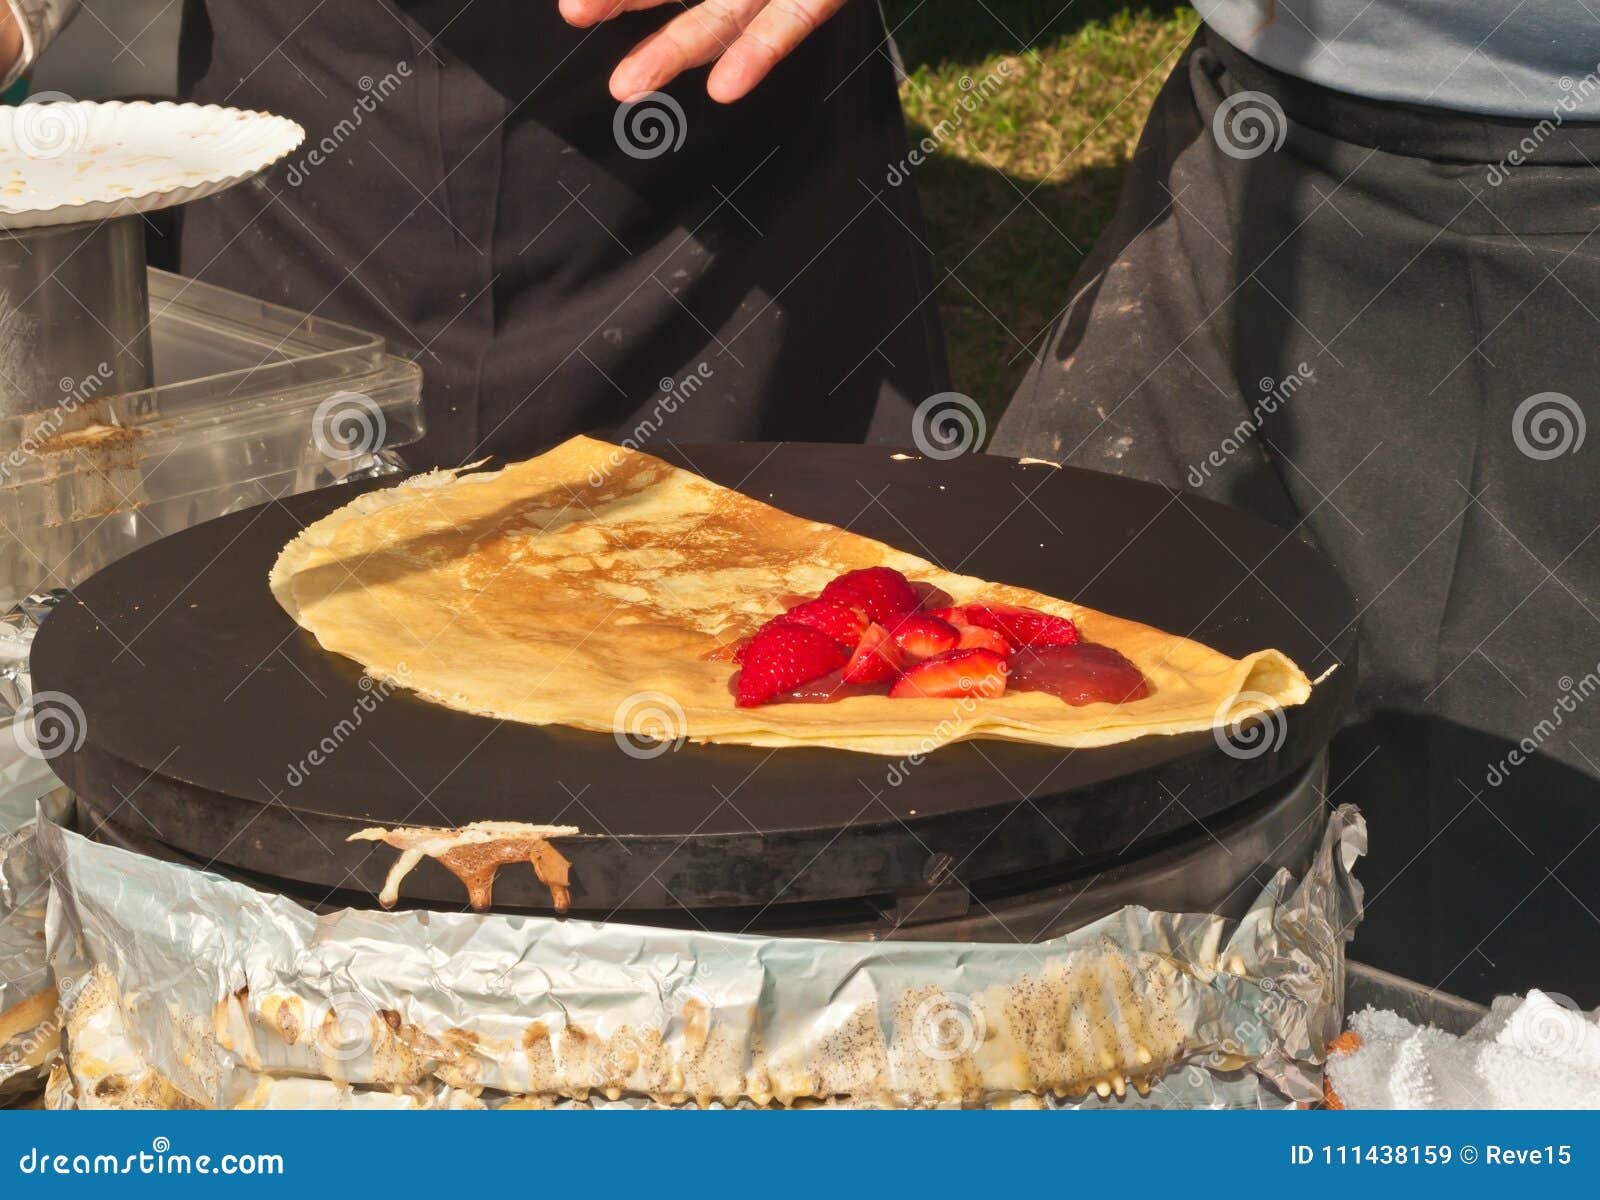 top view of a vender preparing a strawberry crepe